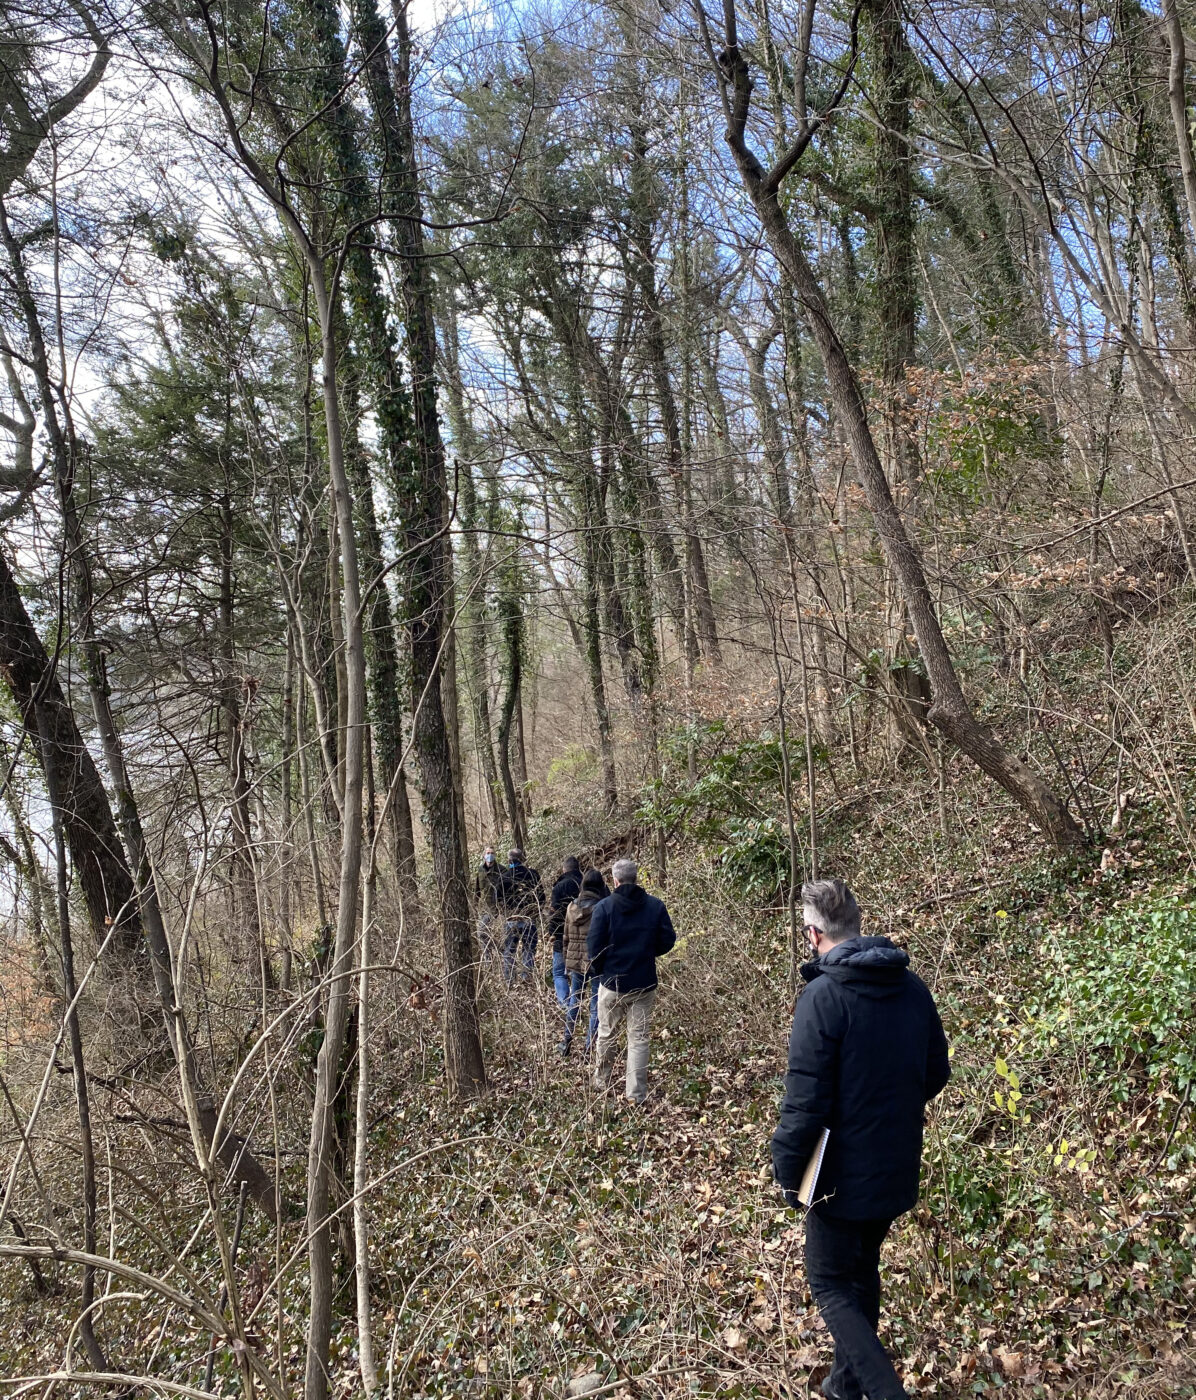 The architecture team follows the trails through the woods behind the Eugenia Williams House.